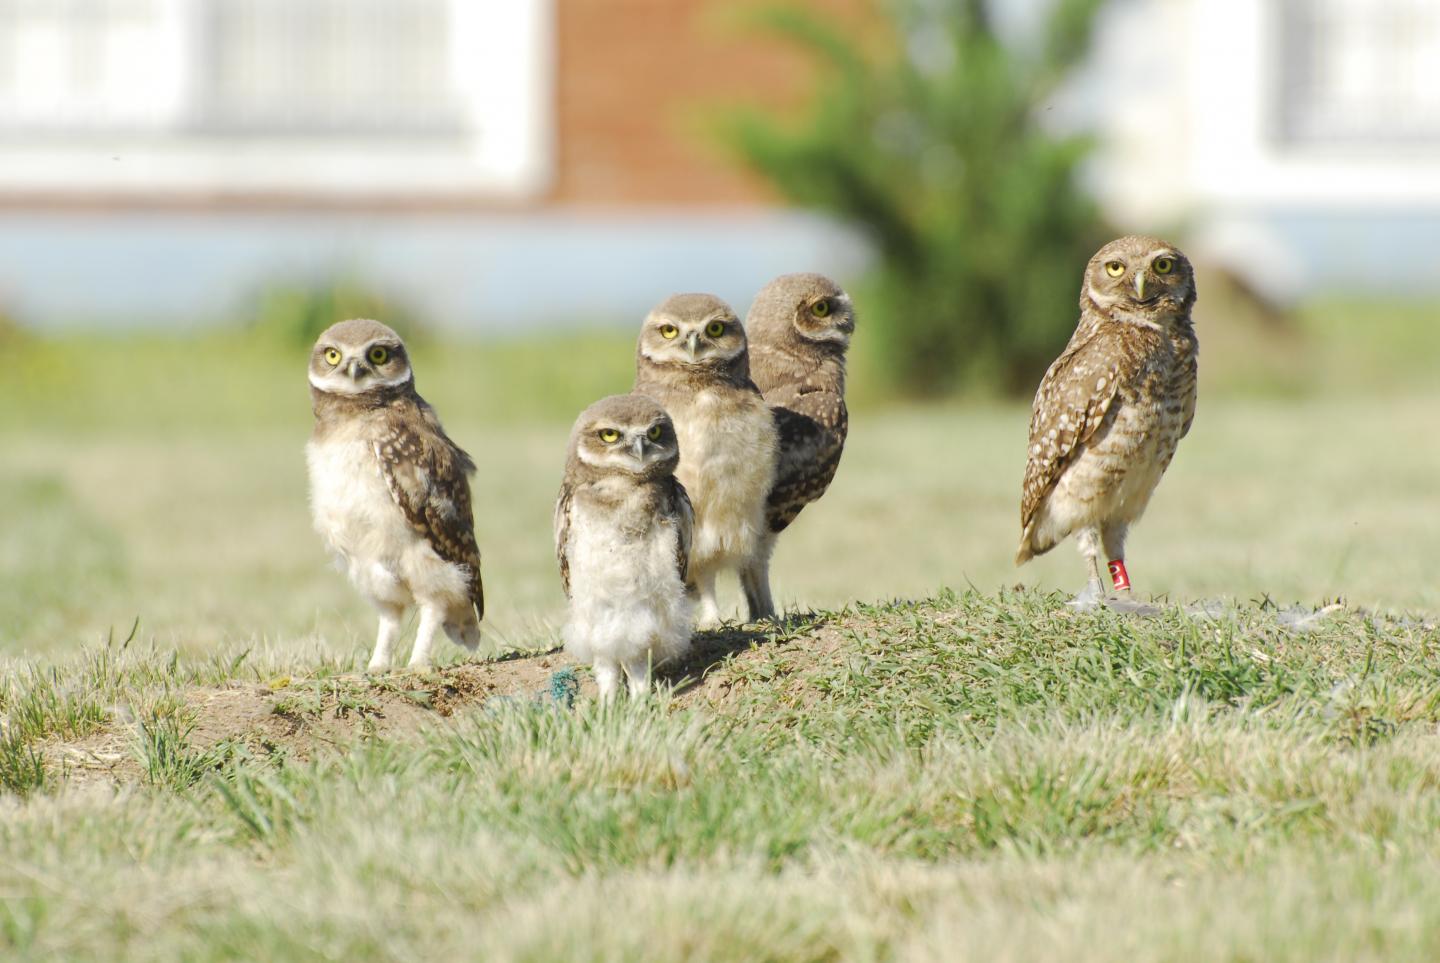 Burrowing Owls in South America